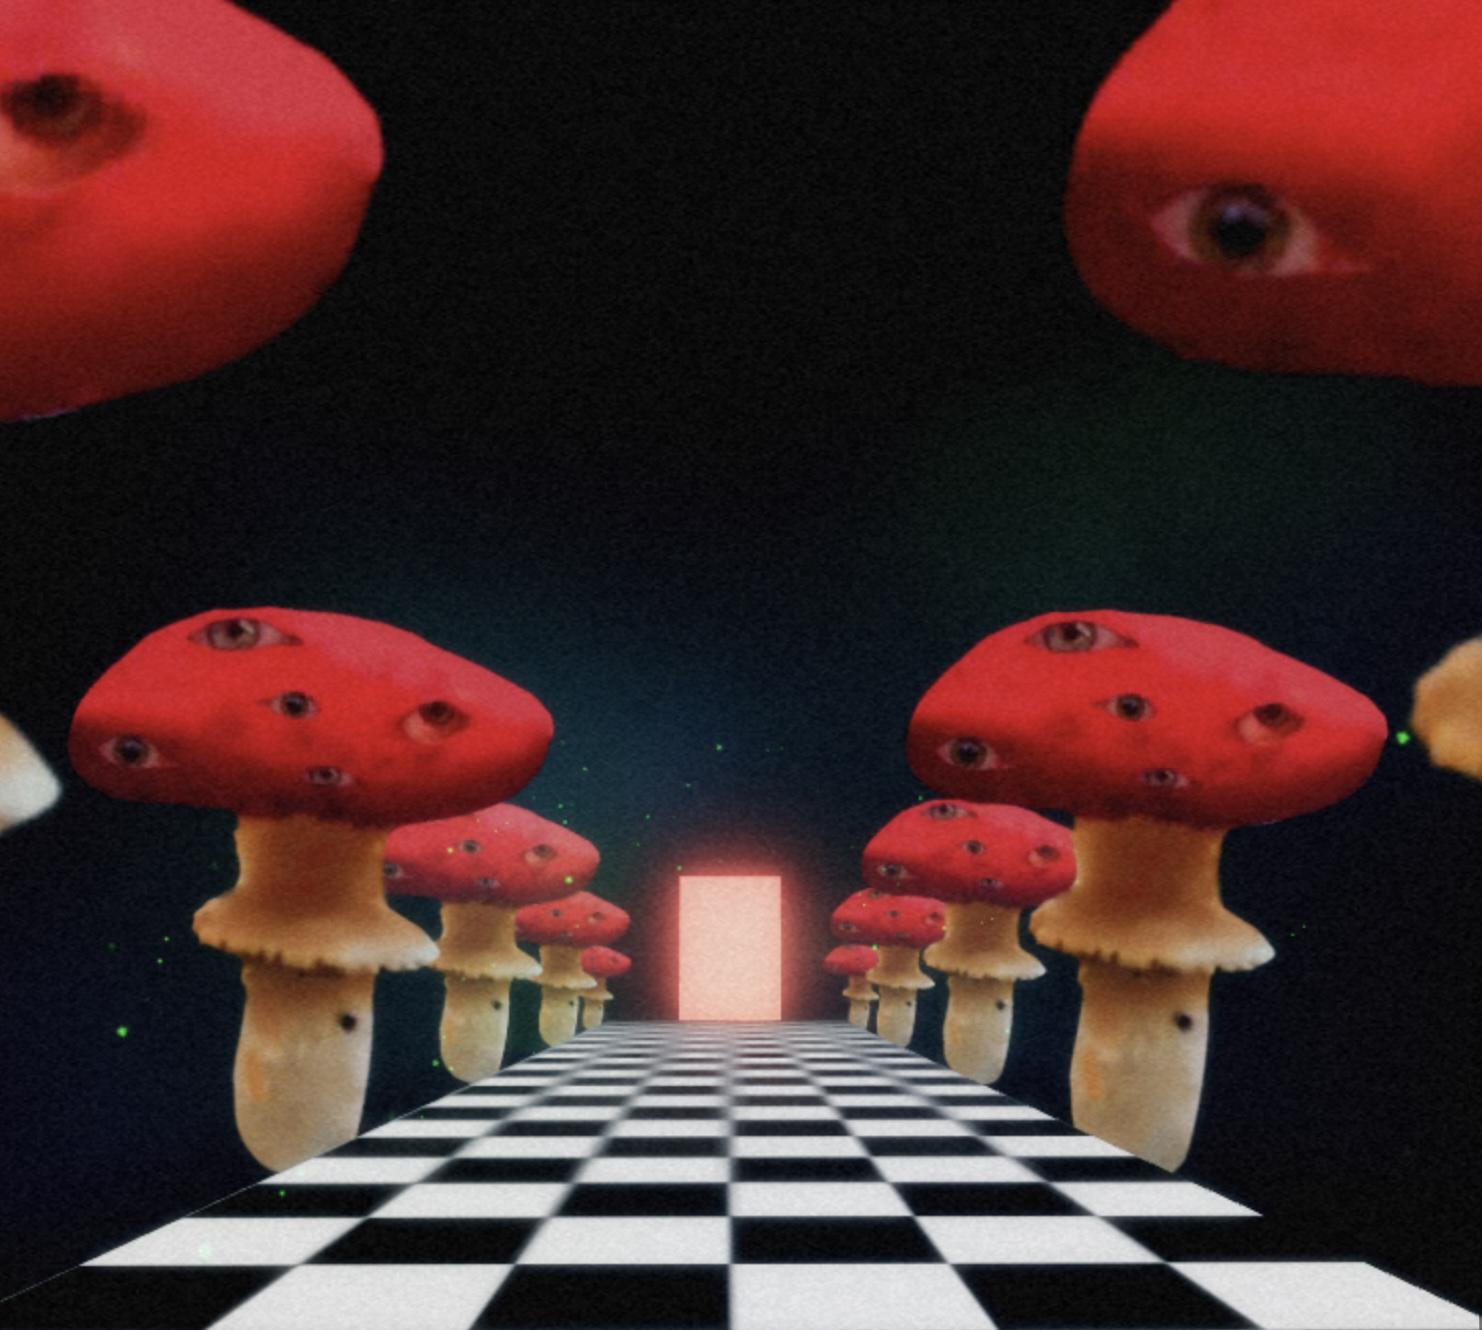 A photo of a black and white checkered floor with red mushrooms with eyes on them - Weirdcore